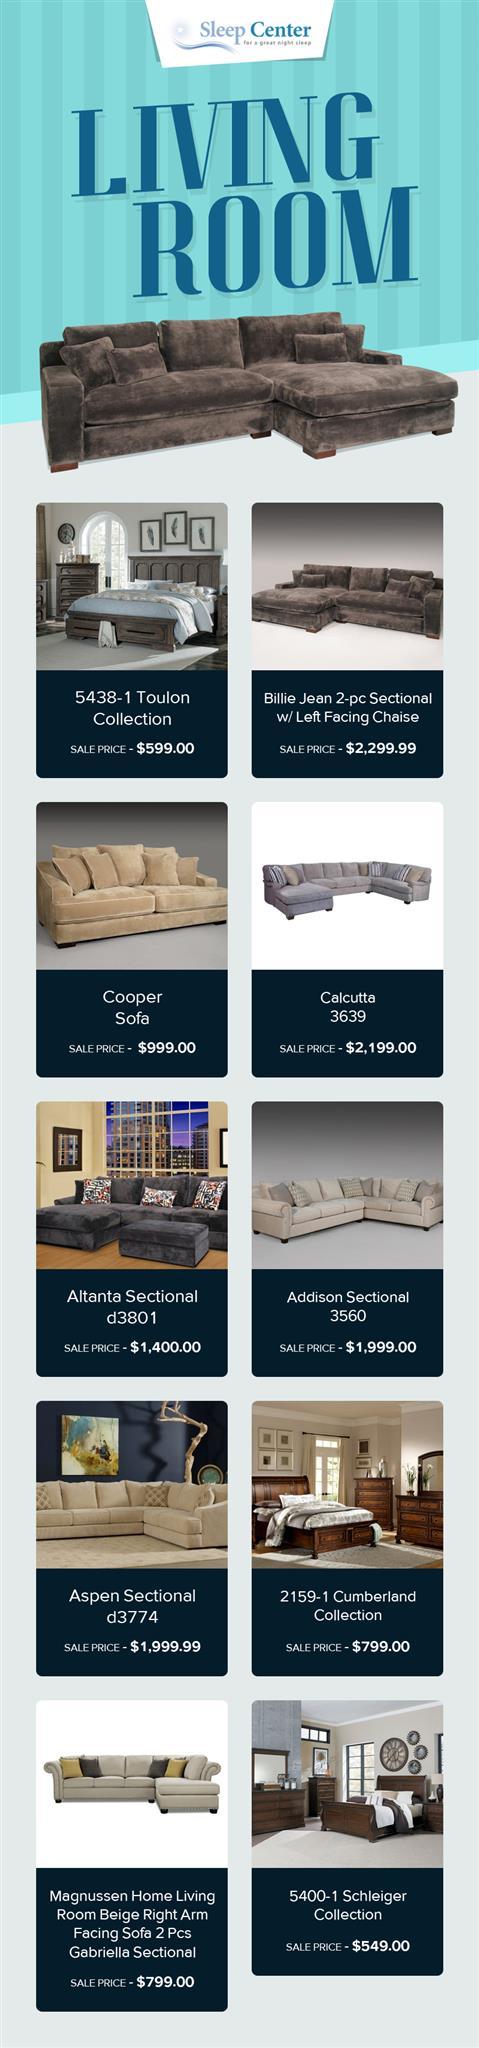 Shop Modern Living Room Furniture Online at the Best Prices from Sleep Center